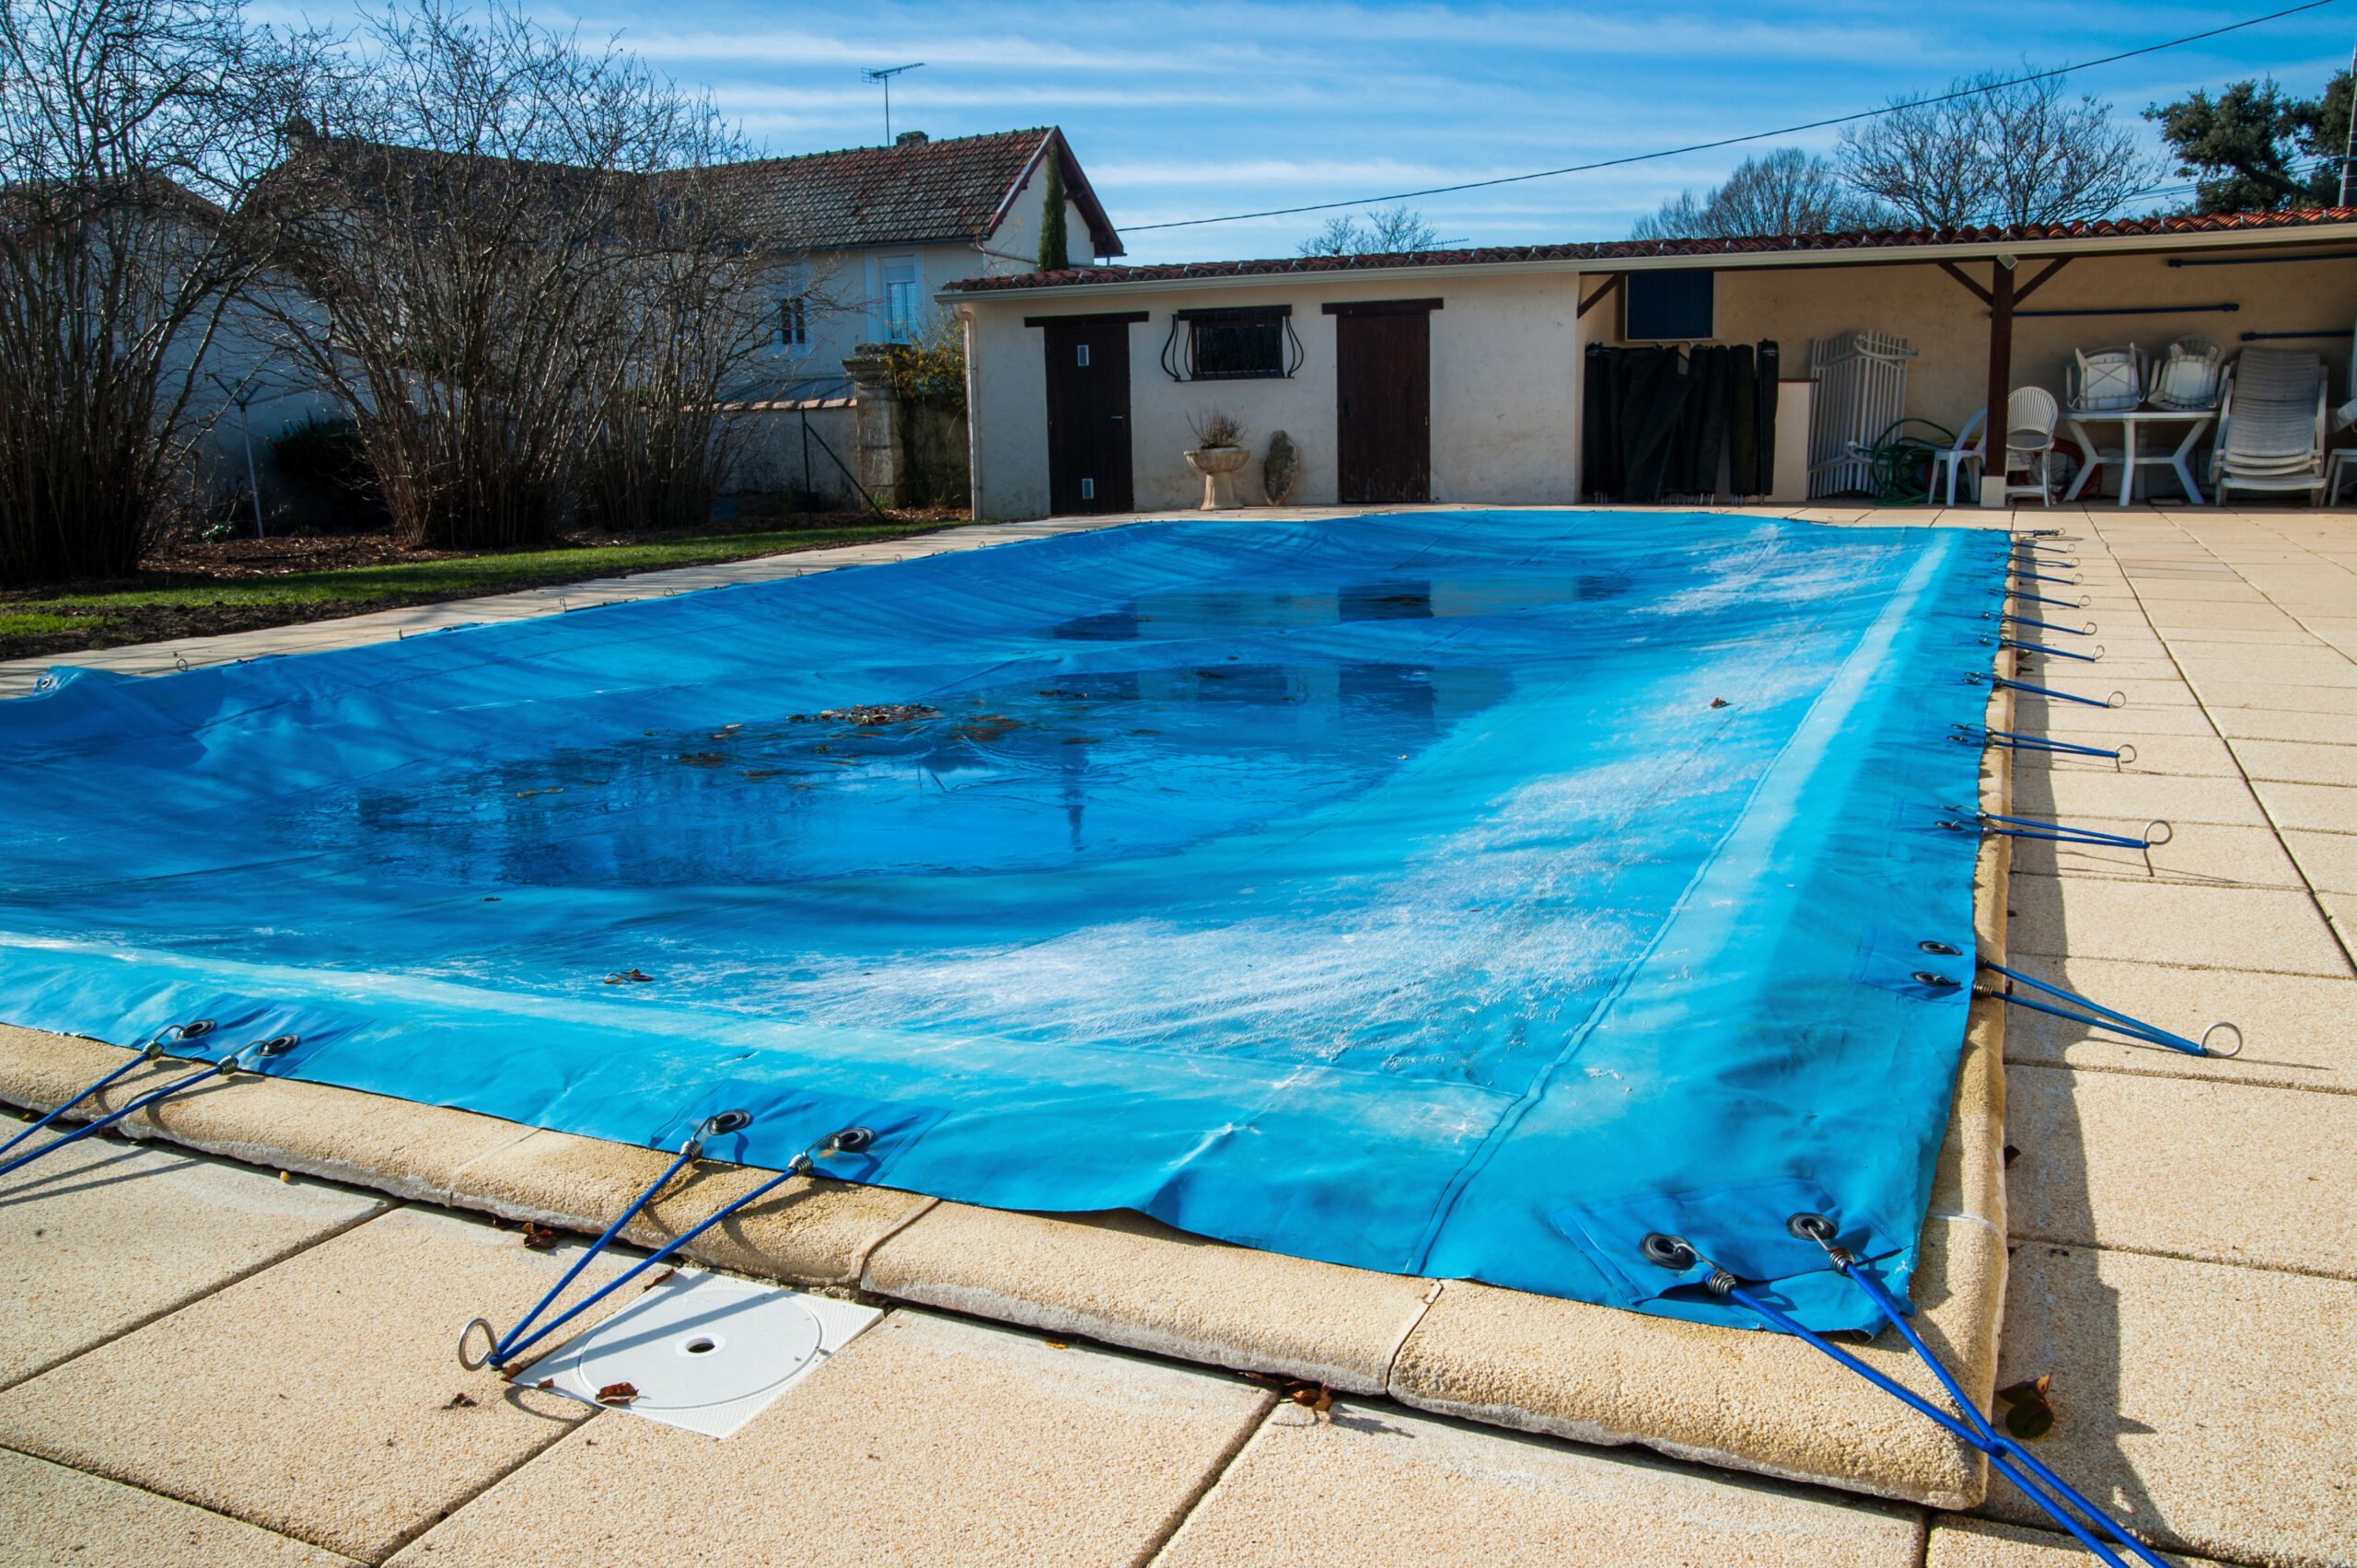 A pool covered with a protective pool cover, safeguarding the water from debris and helping to retain heat when the pool is not in use